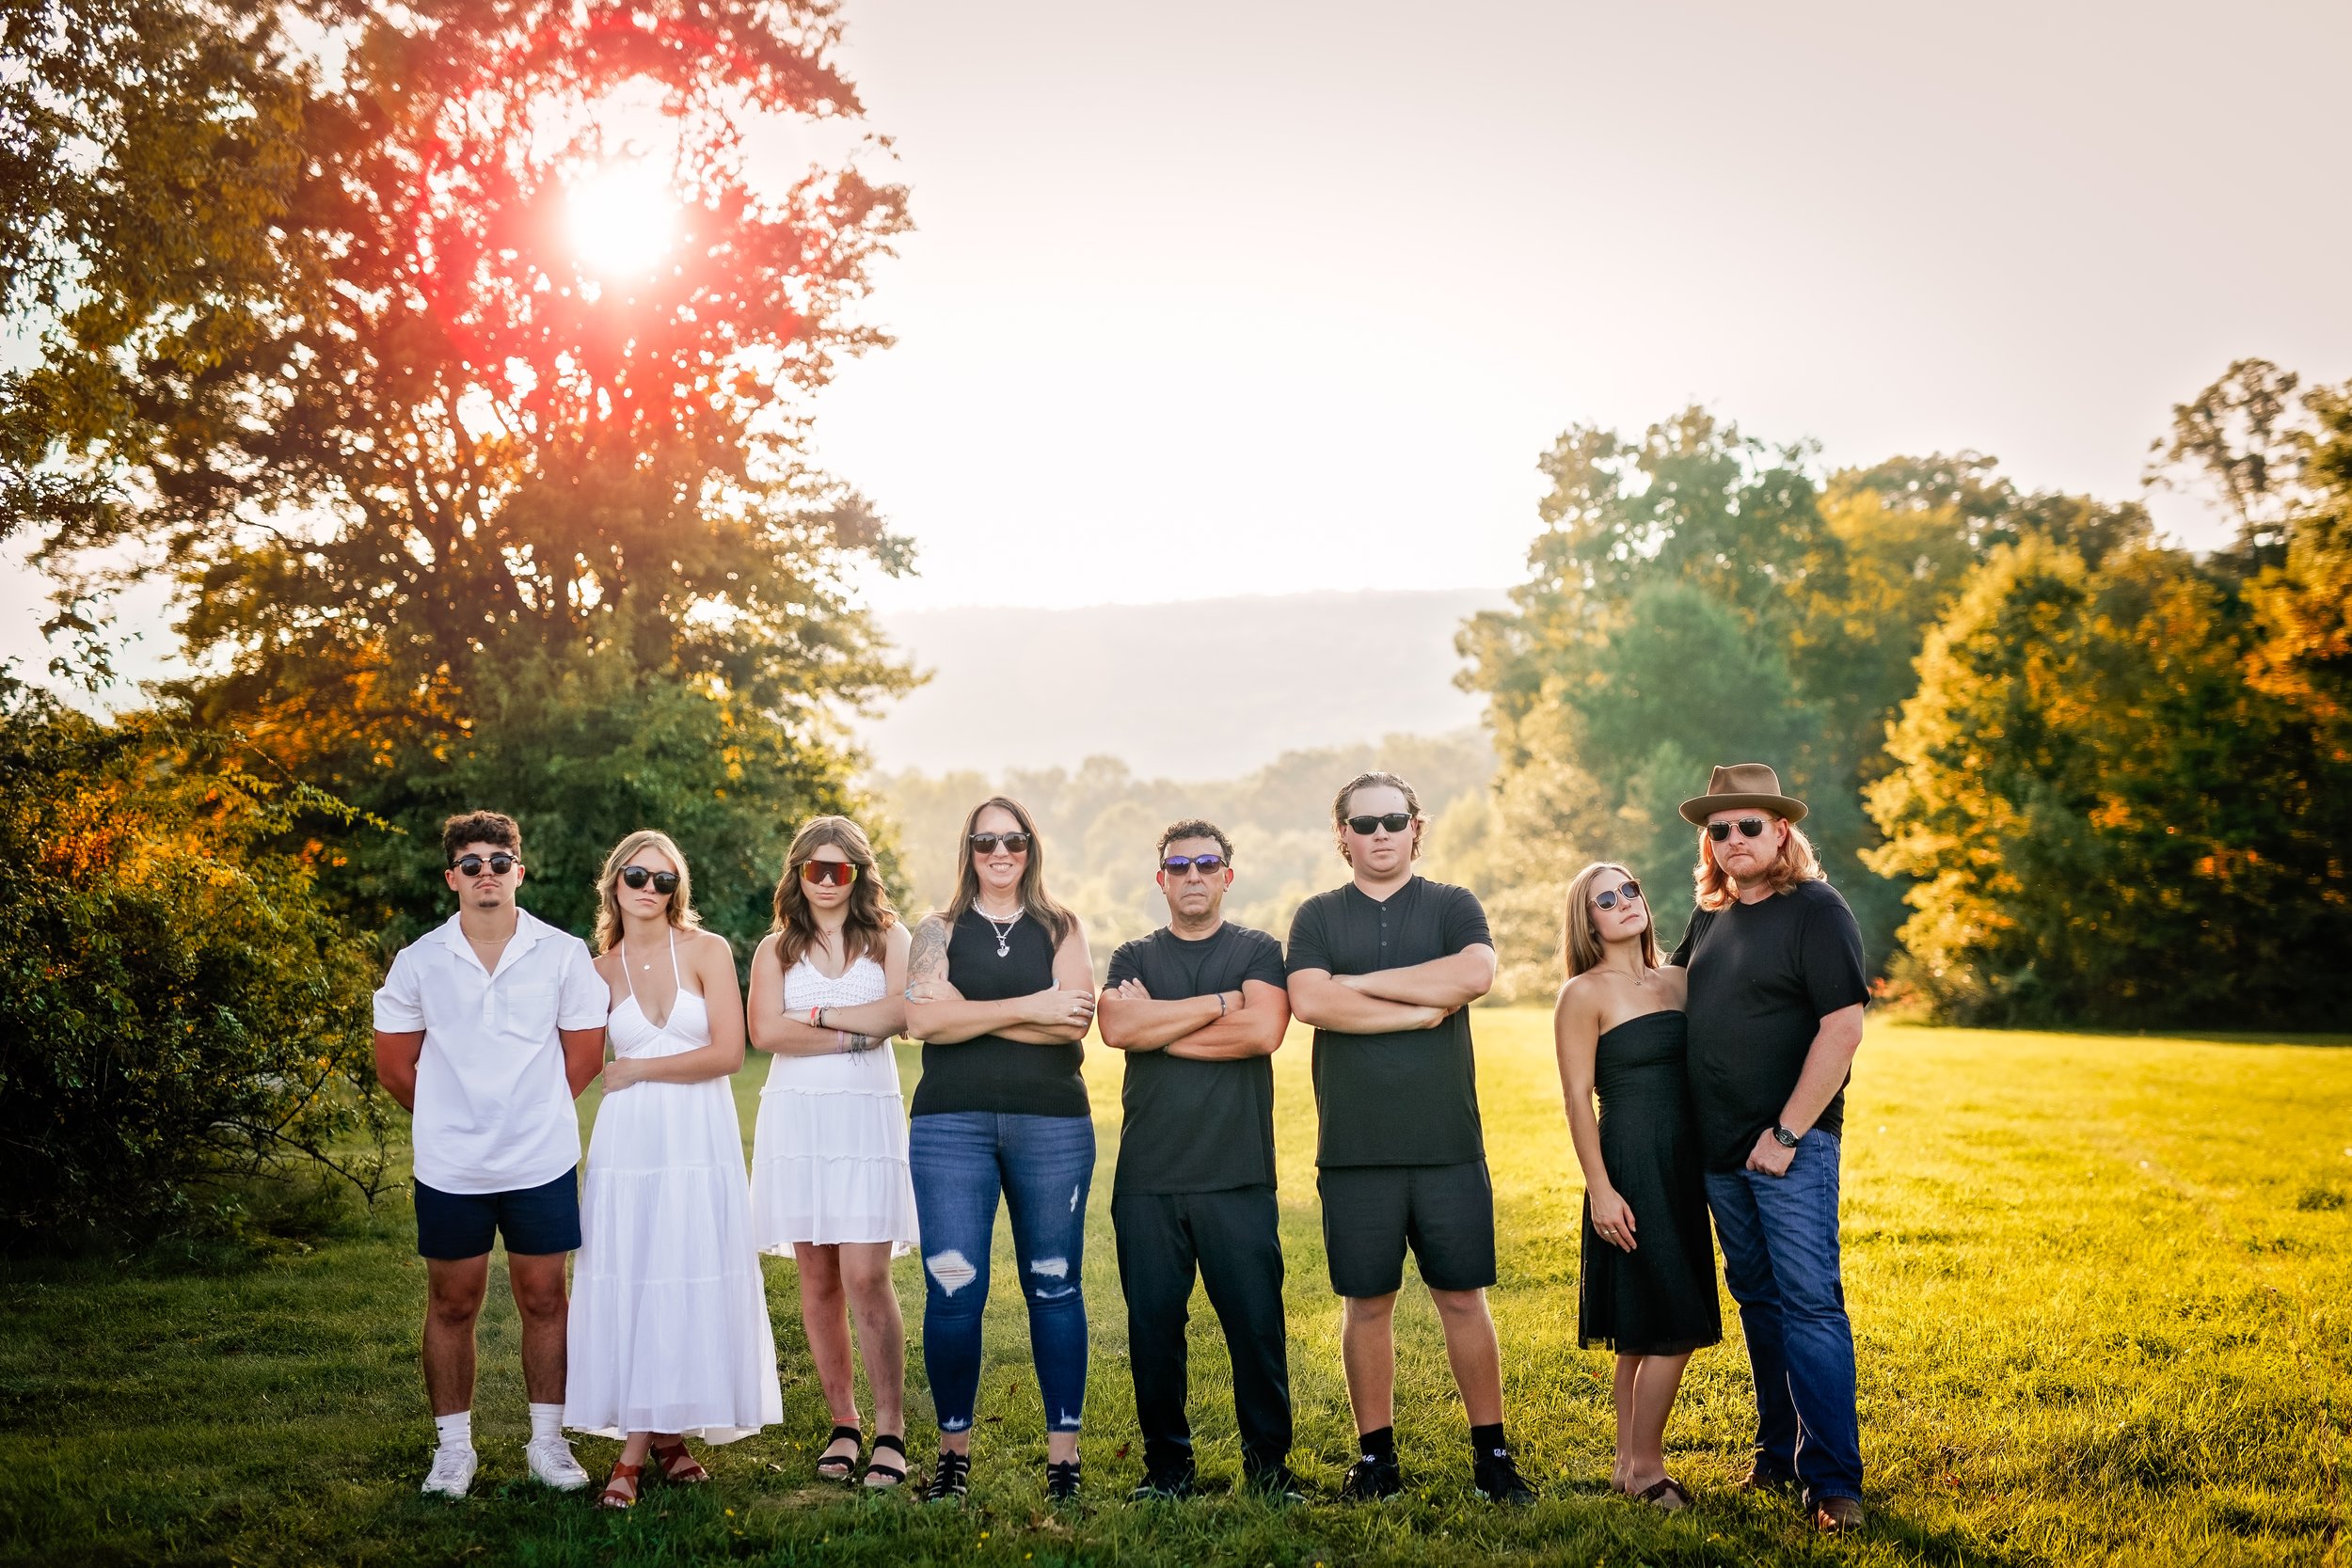  Family in sunglasses stand in a row with their arms folded, striking a pose for a comedic shot during their family photo session 